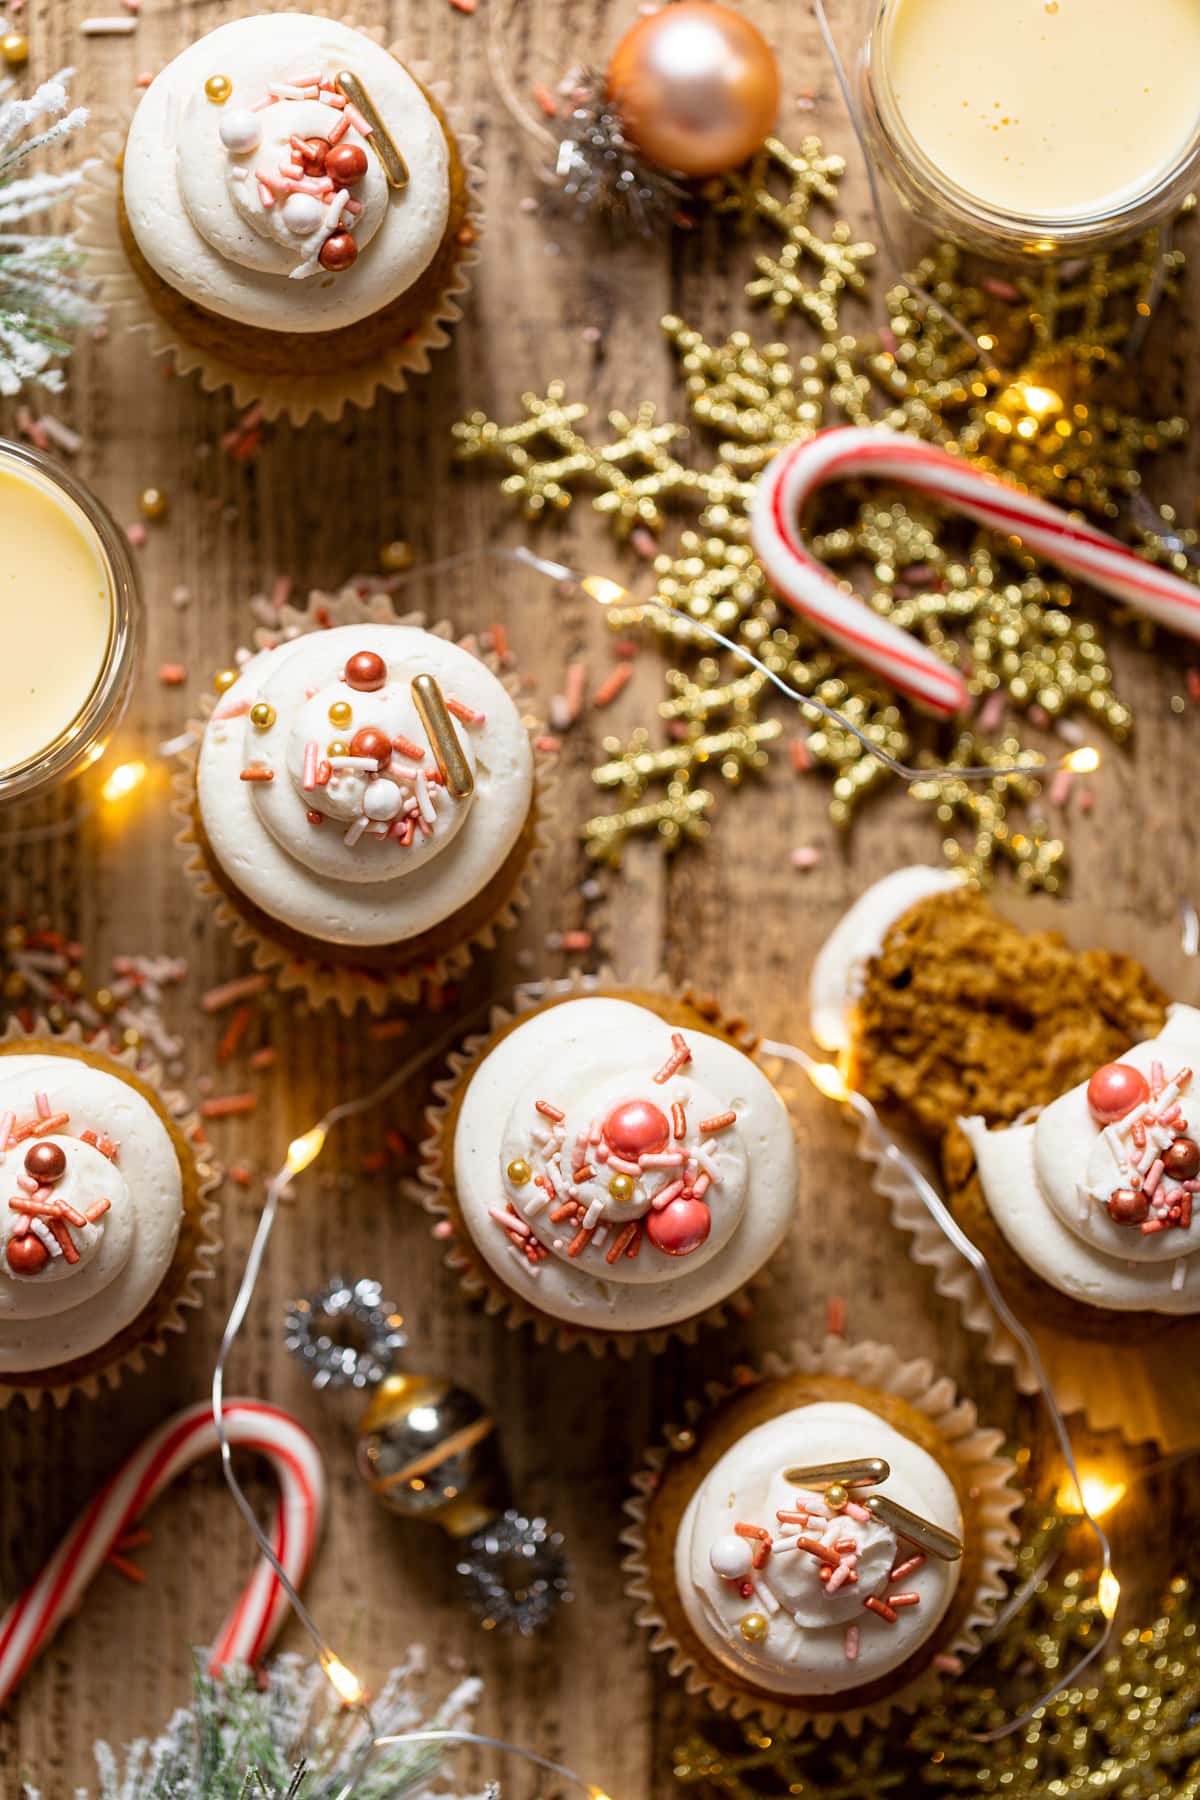 Gingerbread Cupcakes with Eggnog Frosting on a table with Christmas decorations including gold-colored snowflakes